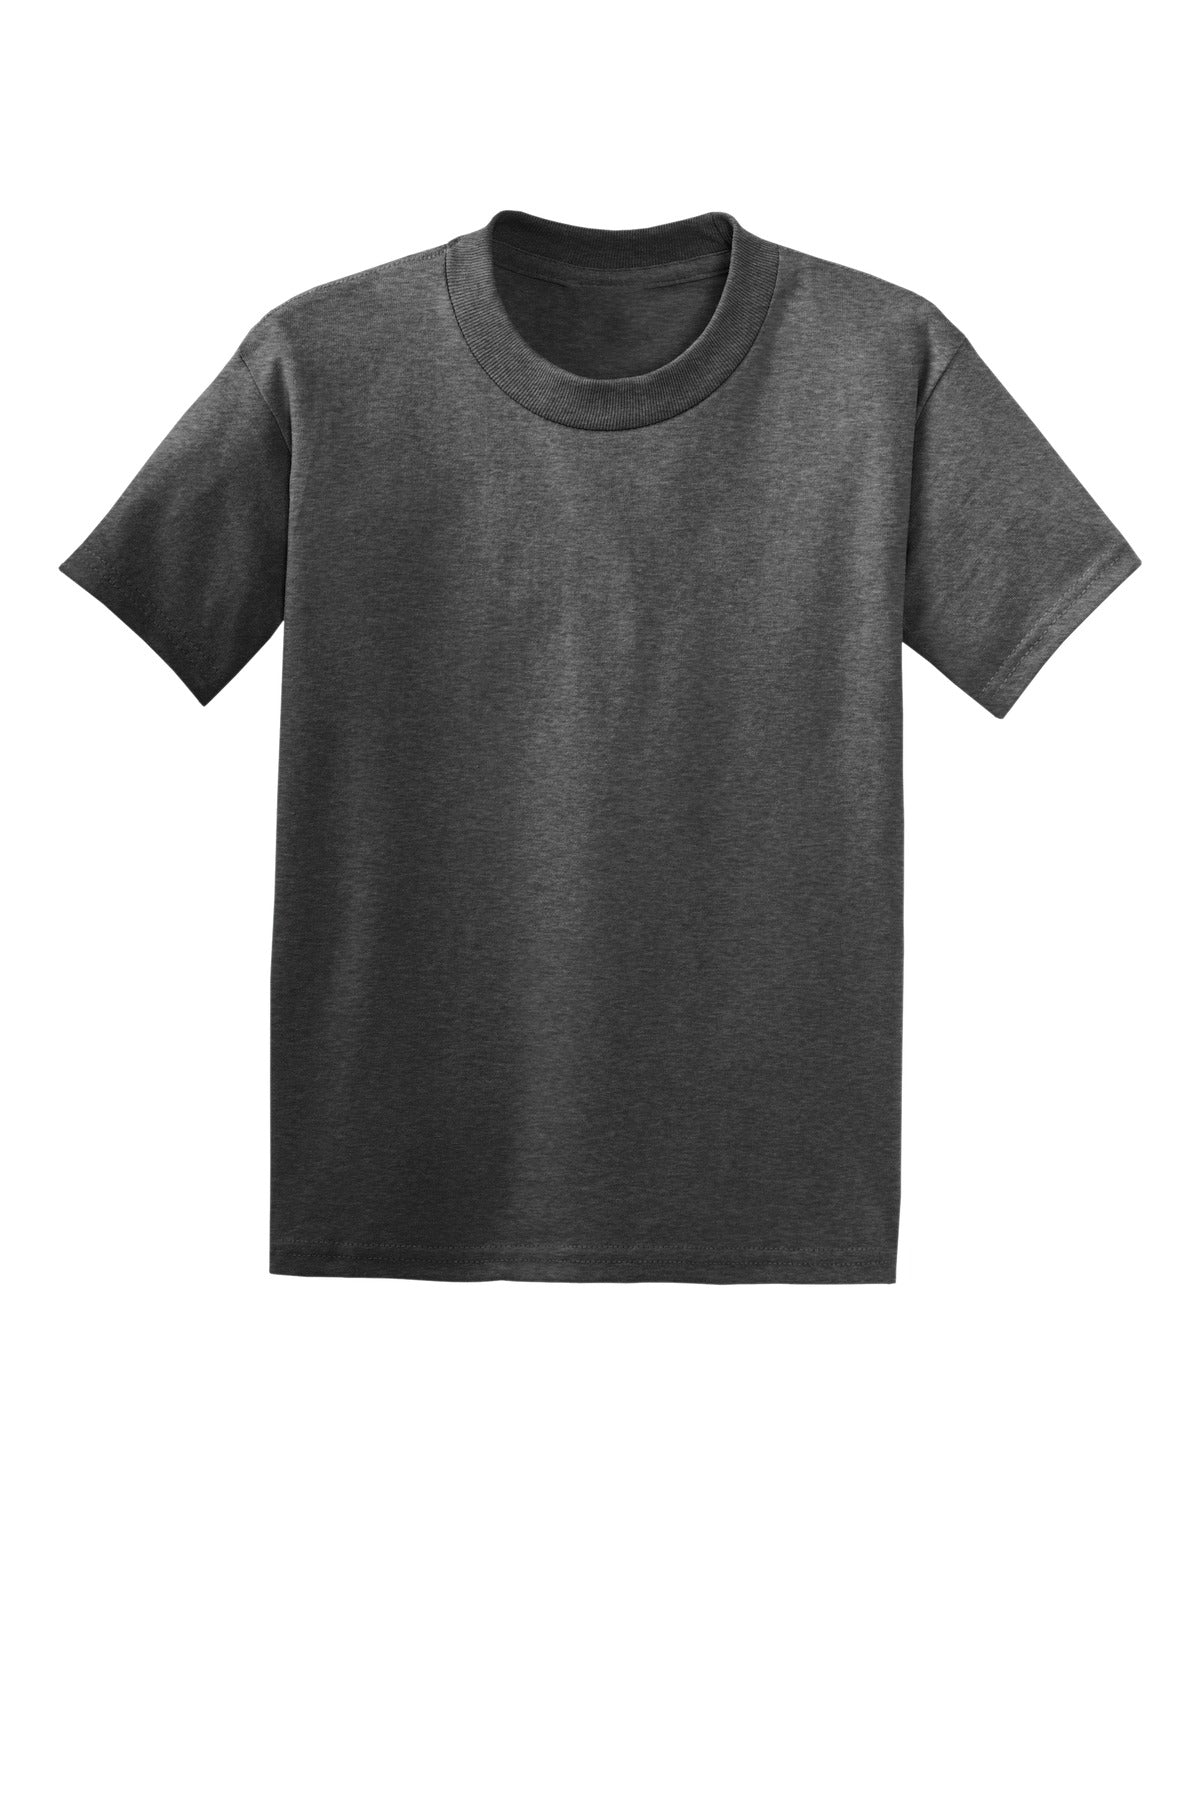 Kids Shirt by Hanes Size 10-12, Gray in Color Rn 15763